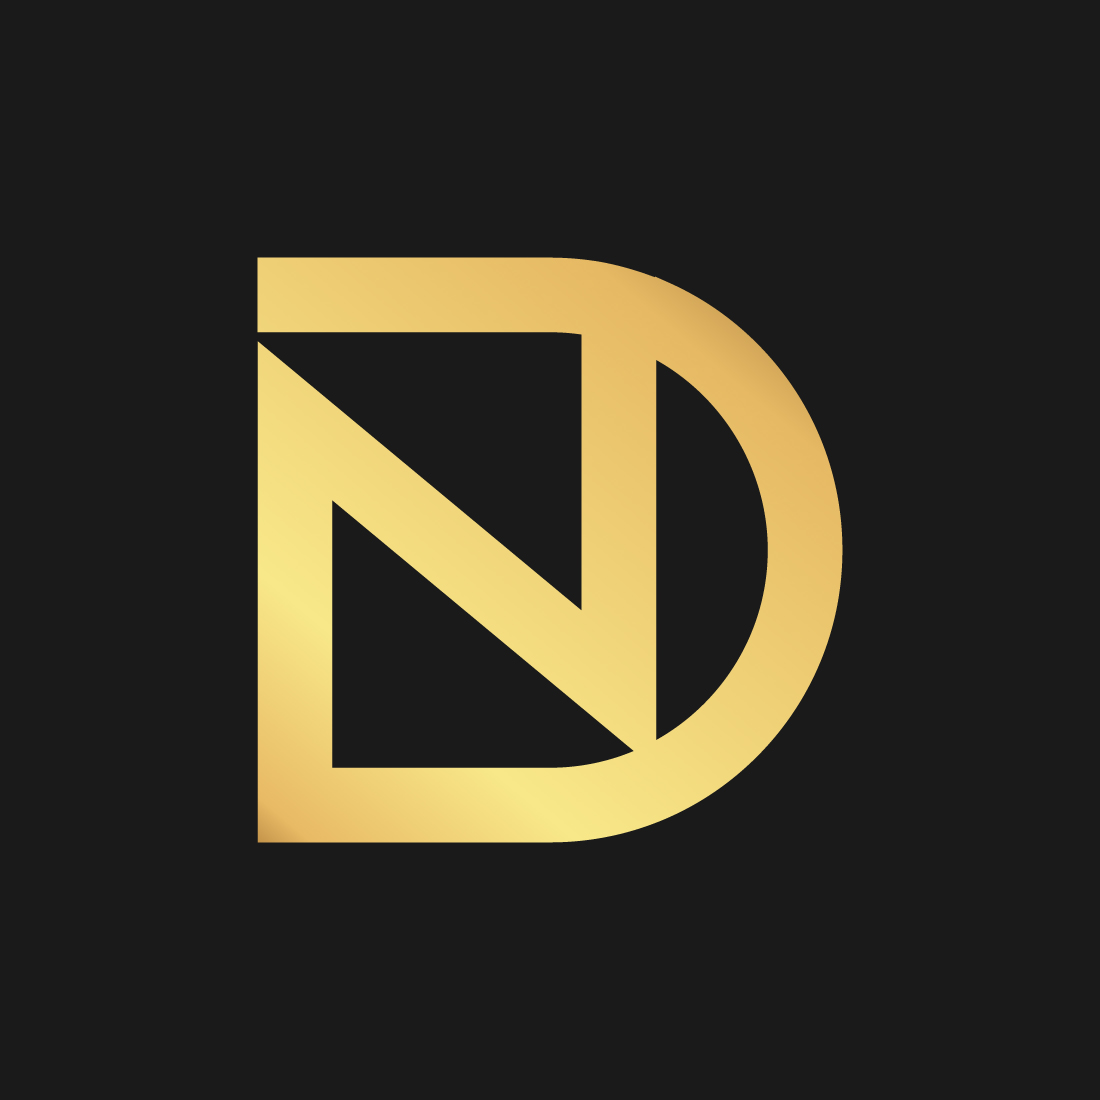 ND logo design preview image.